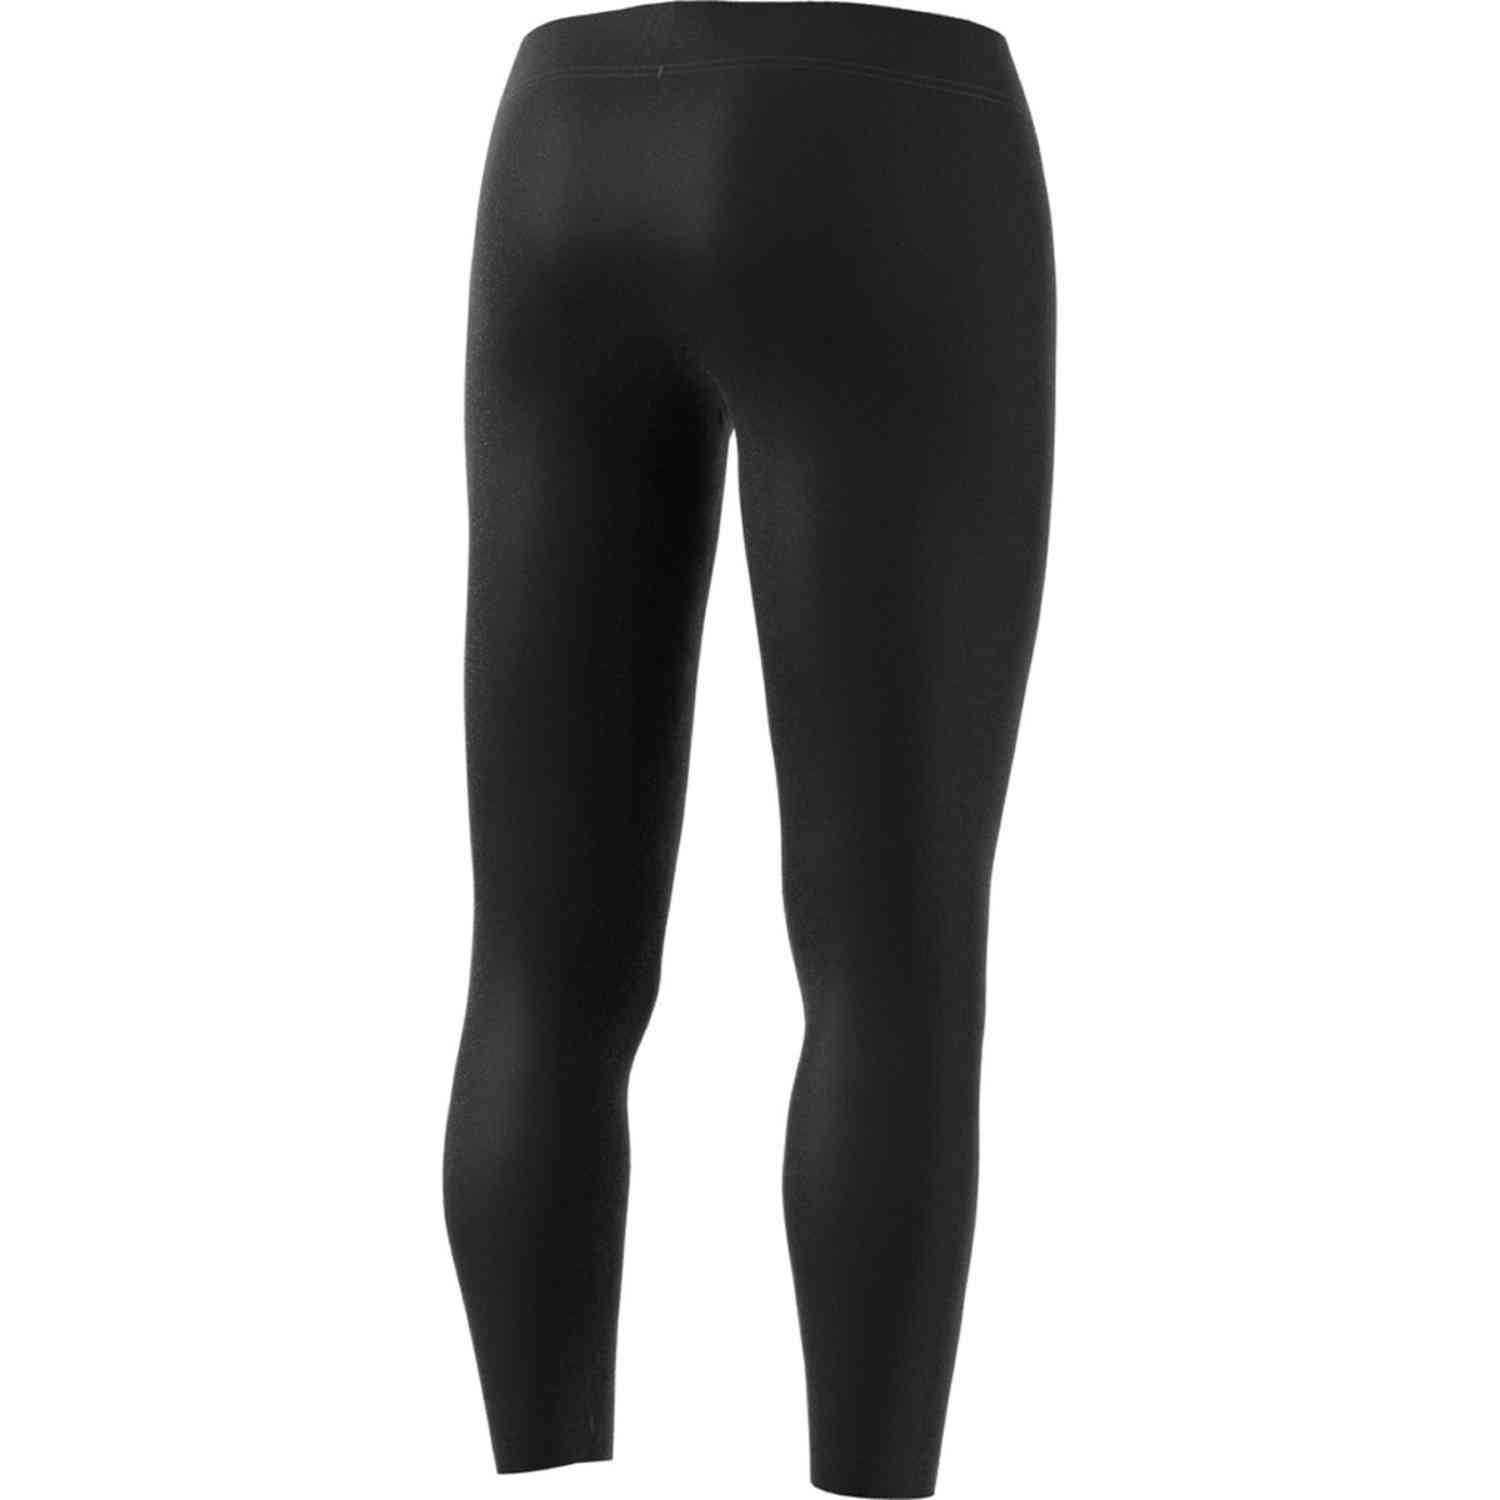 Womens Lifestyle Tights - Black/White - Soccer Master